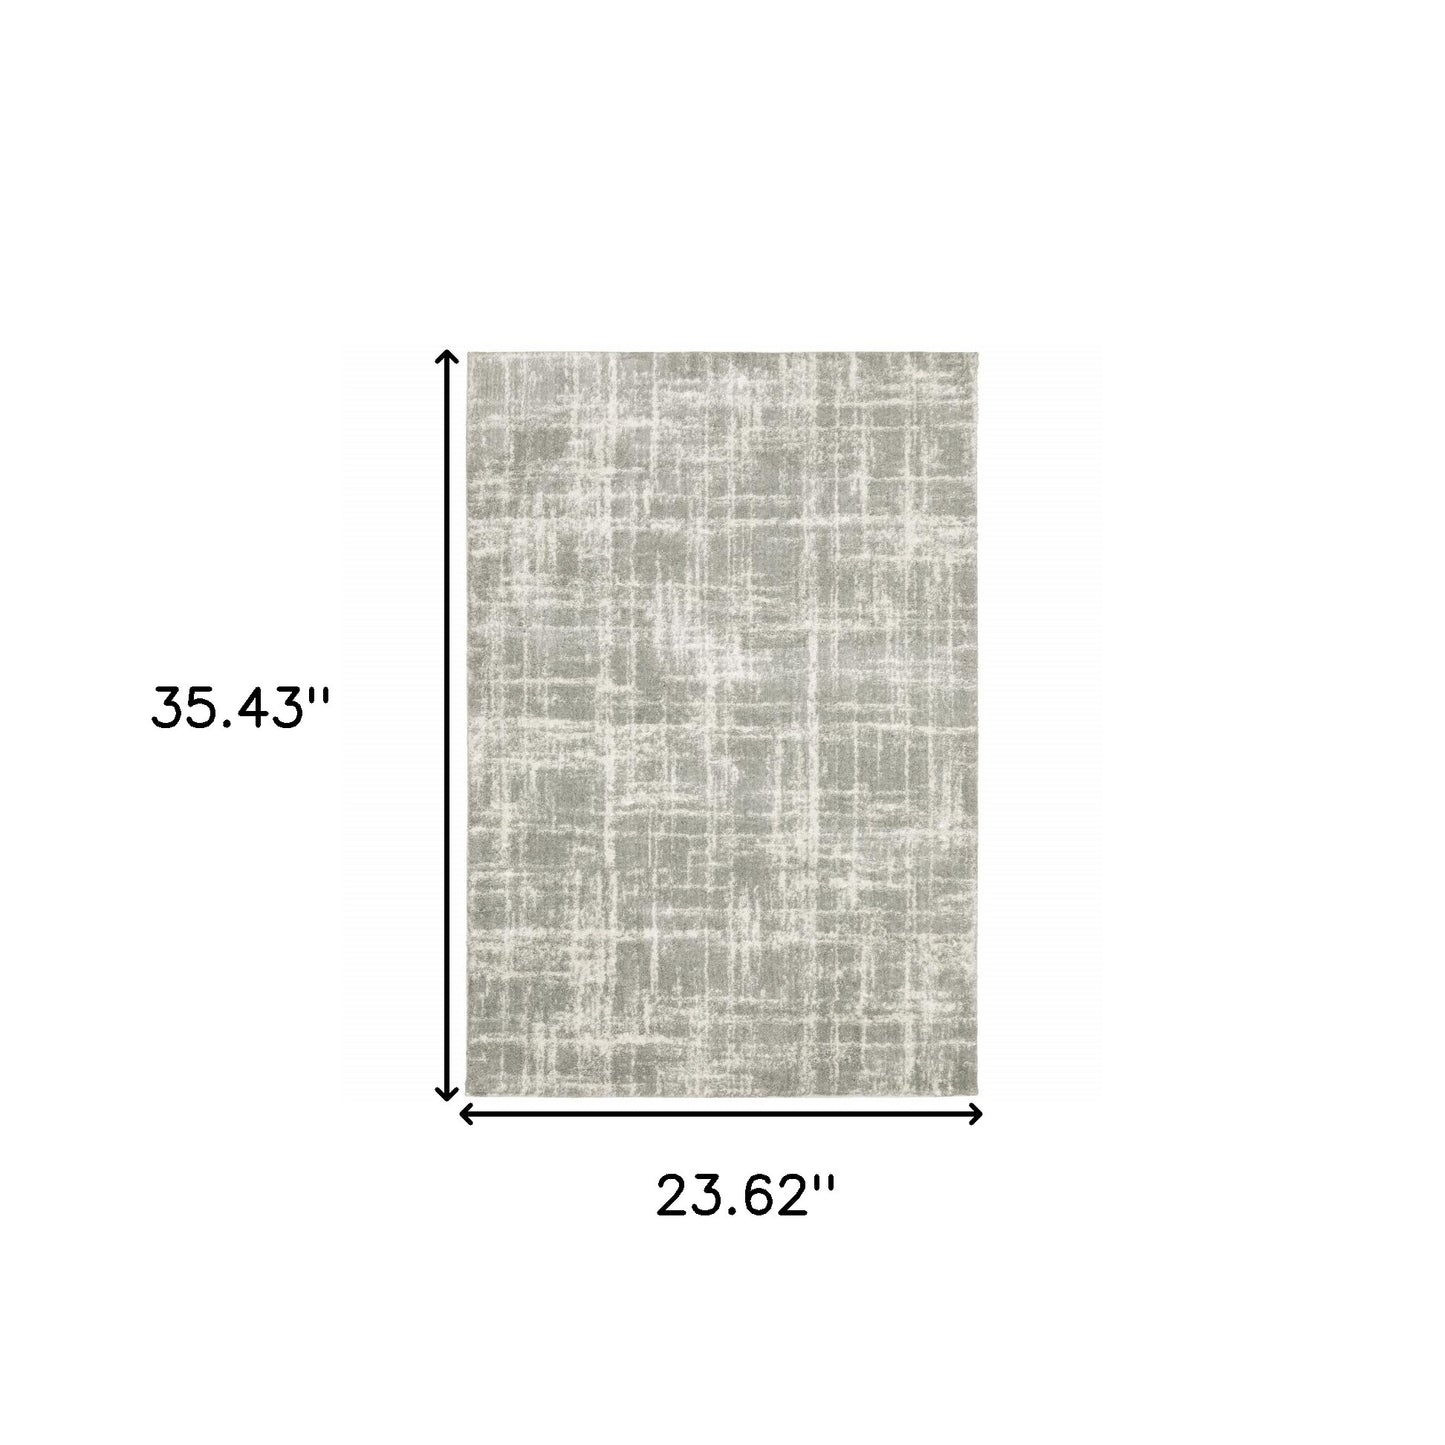 2' X 3' Grey And Ivory Abstract Shag Power Loom Stain Resistant Area Rug